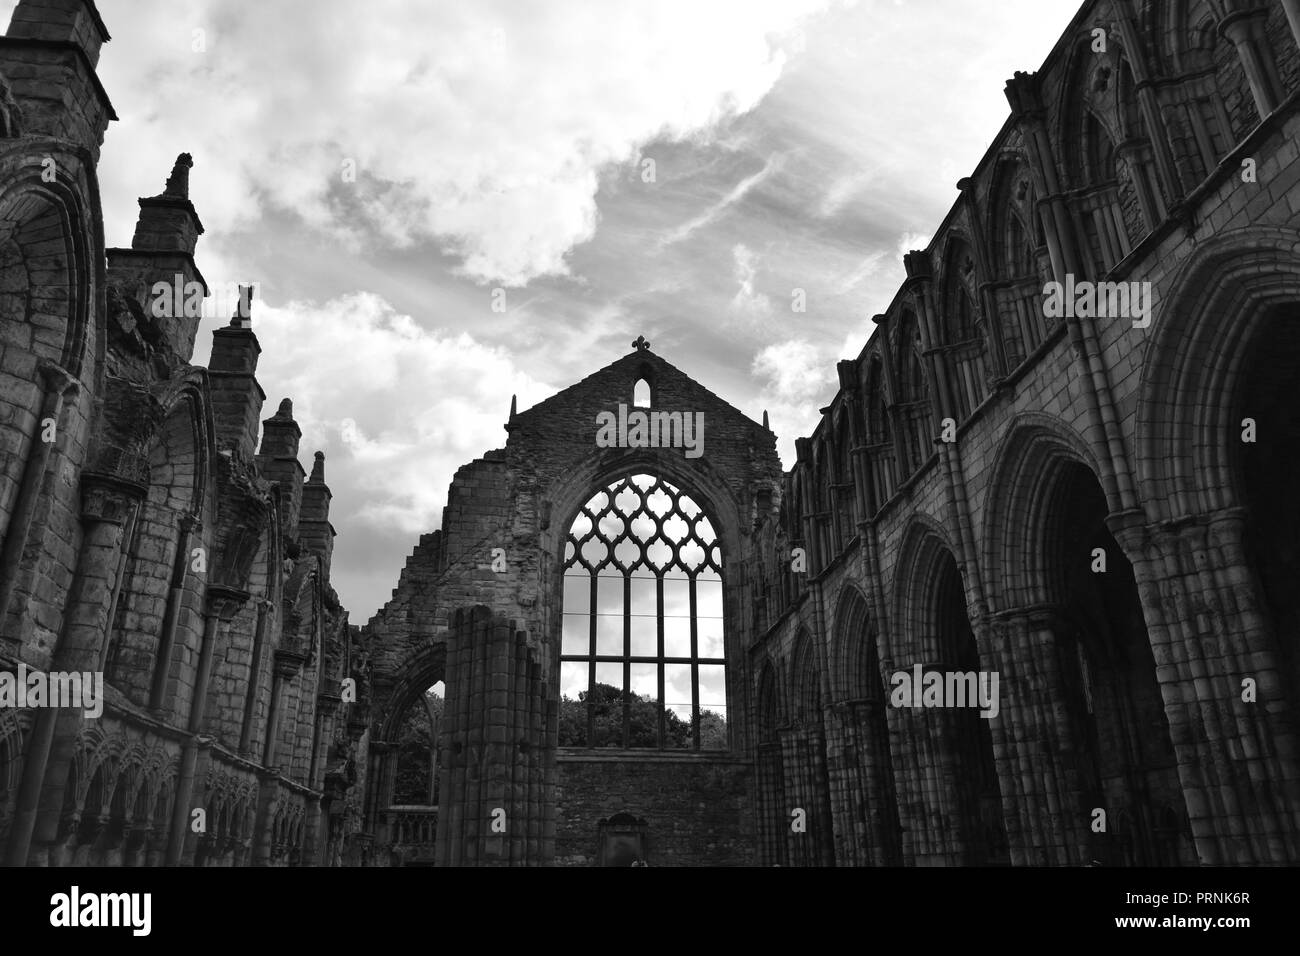 Beauty in the ruins of the Holyrood Abby, Scotland Stock Photo